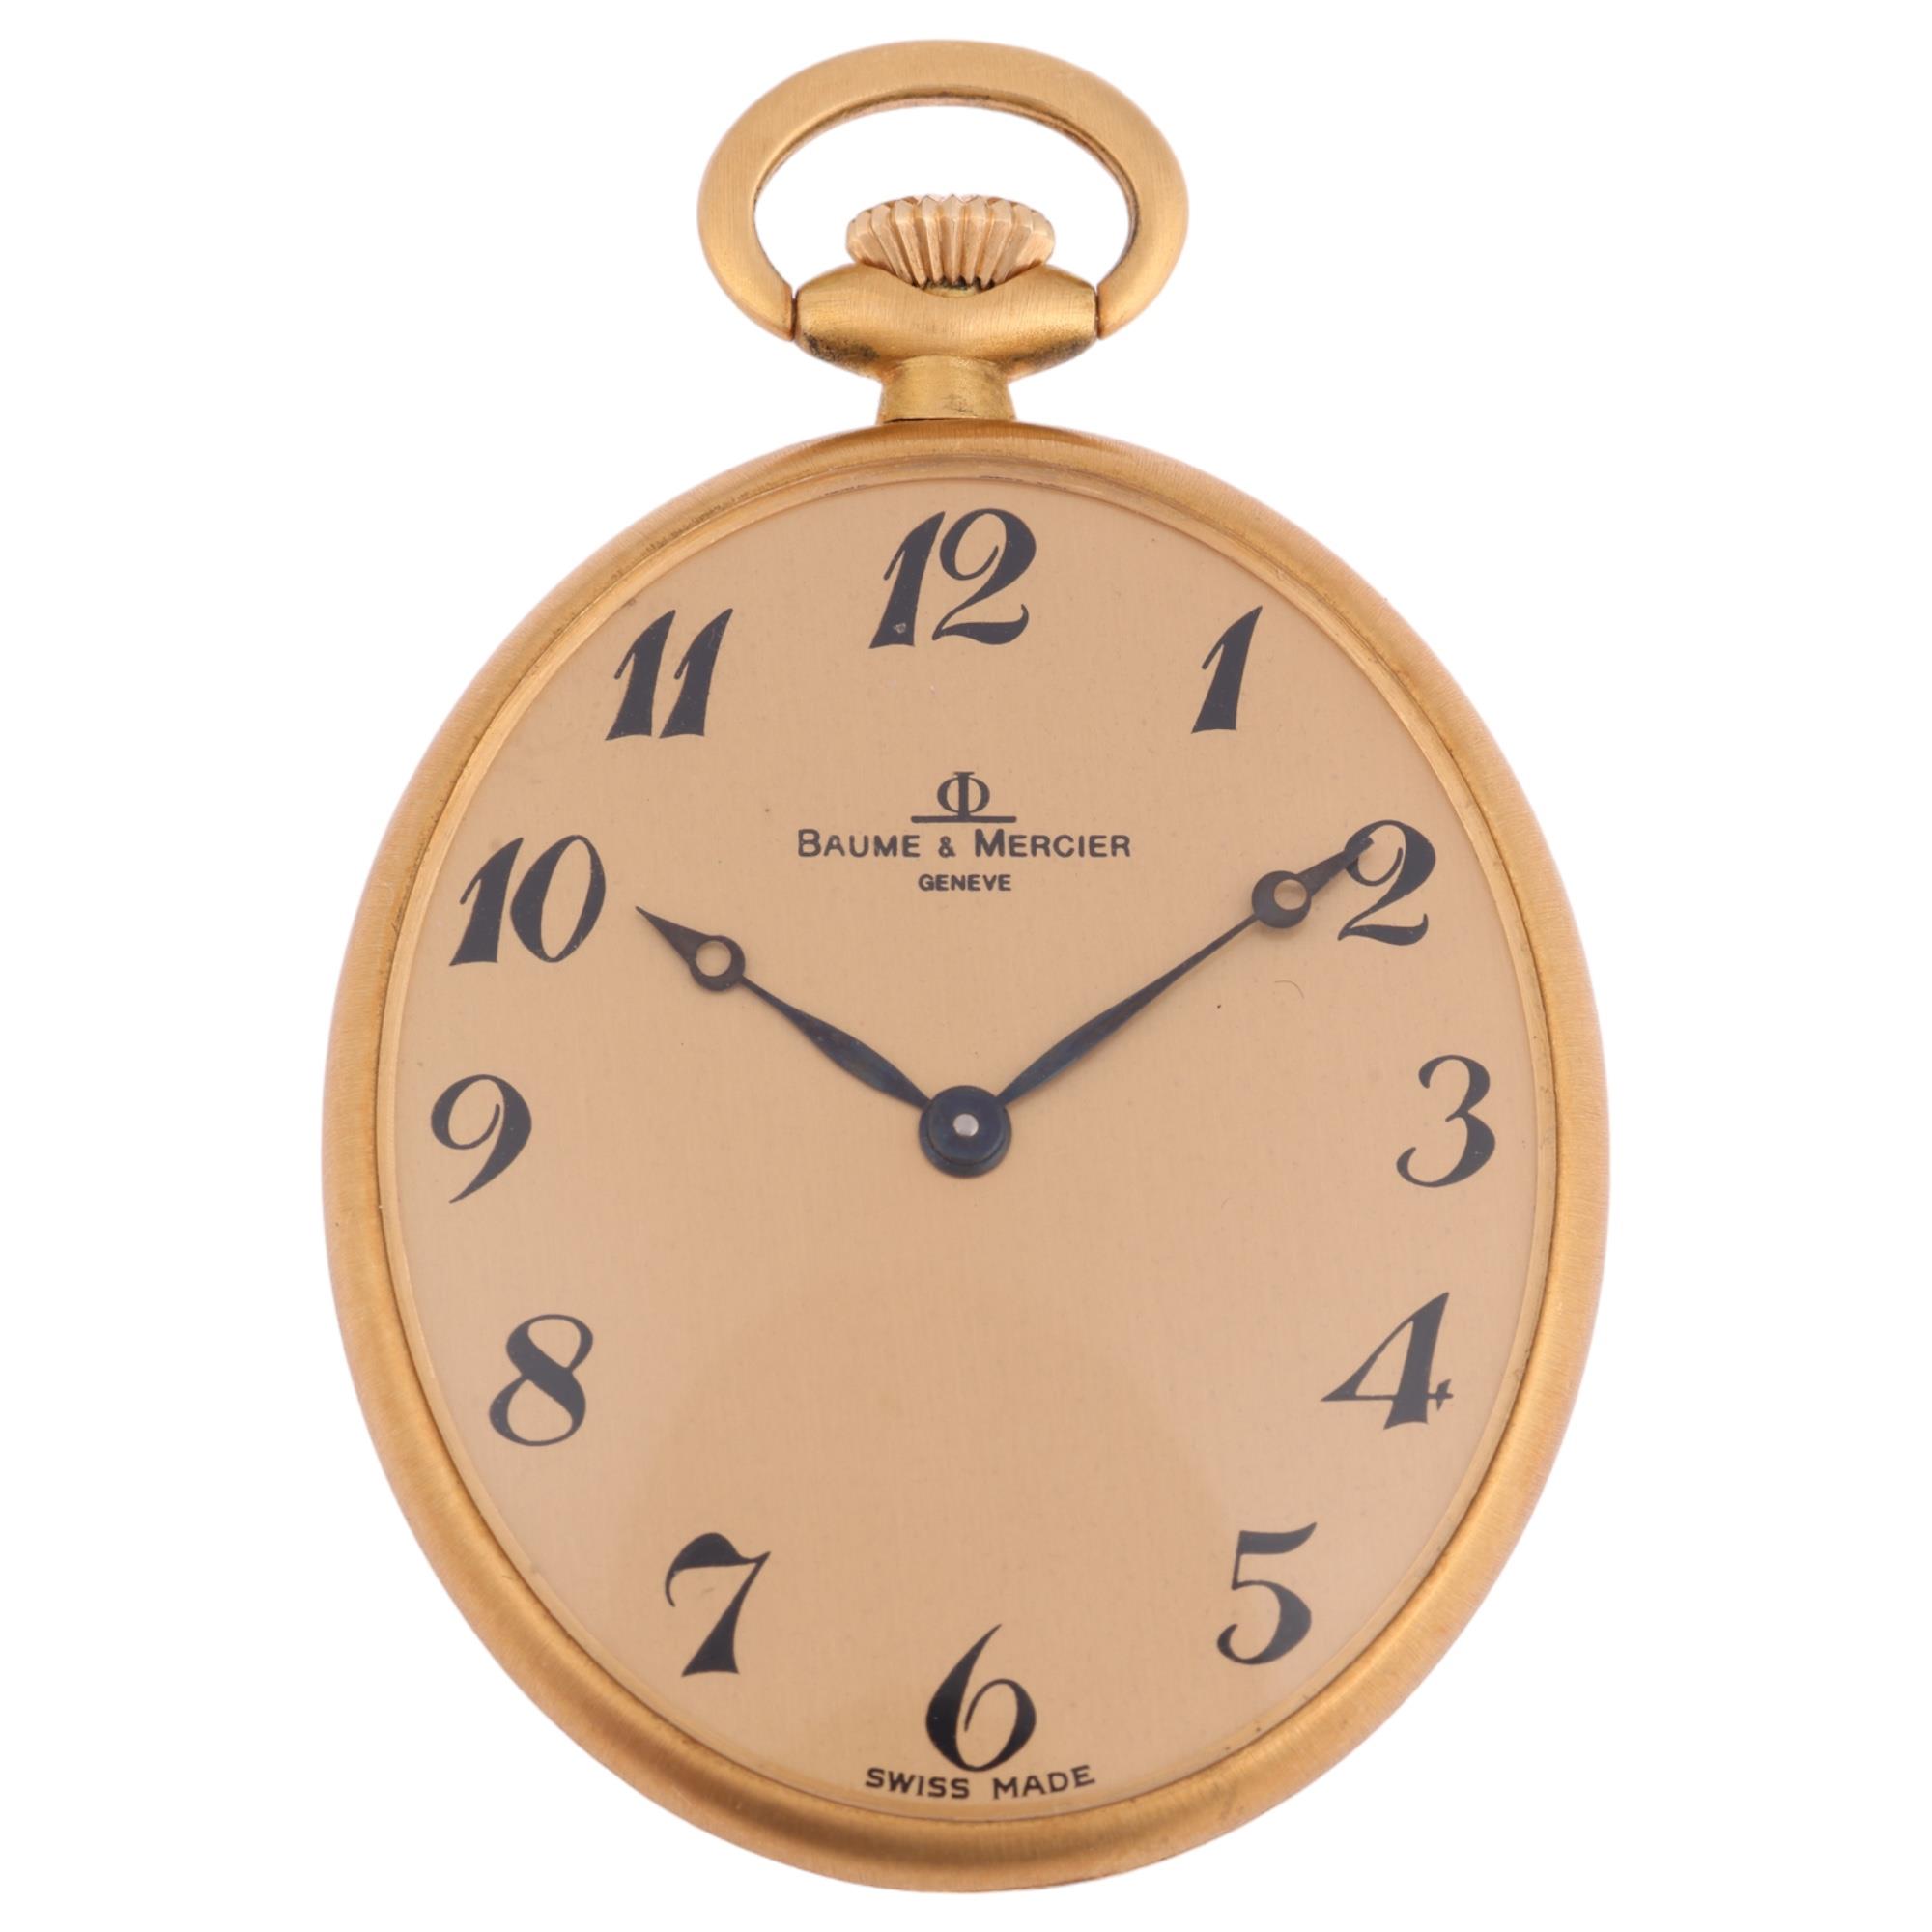 BAUME & MERCIER - a Swiss 18ct gold oval open-face keyless pocket watch, champagne dial with